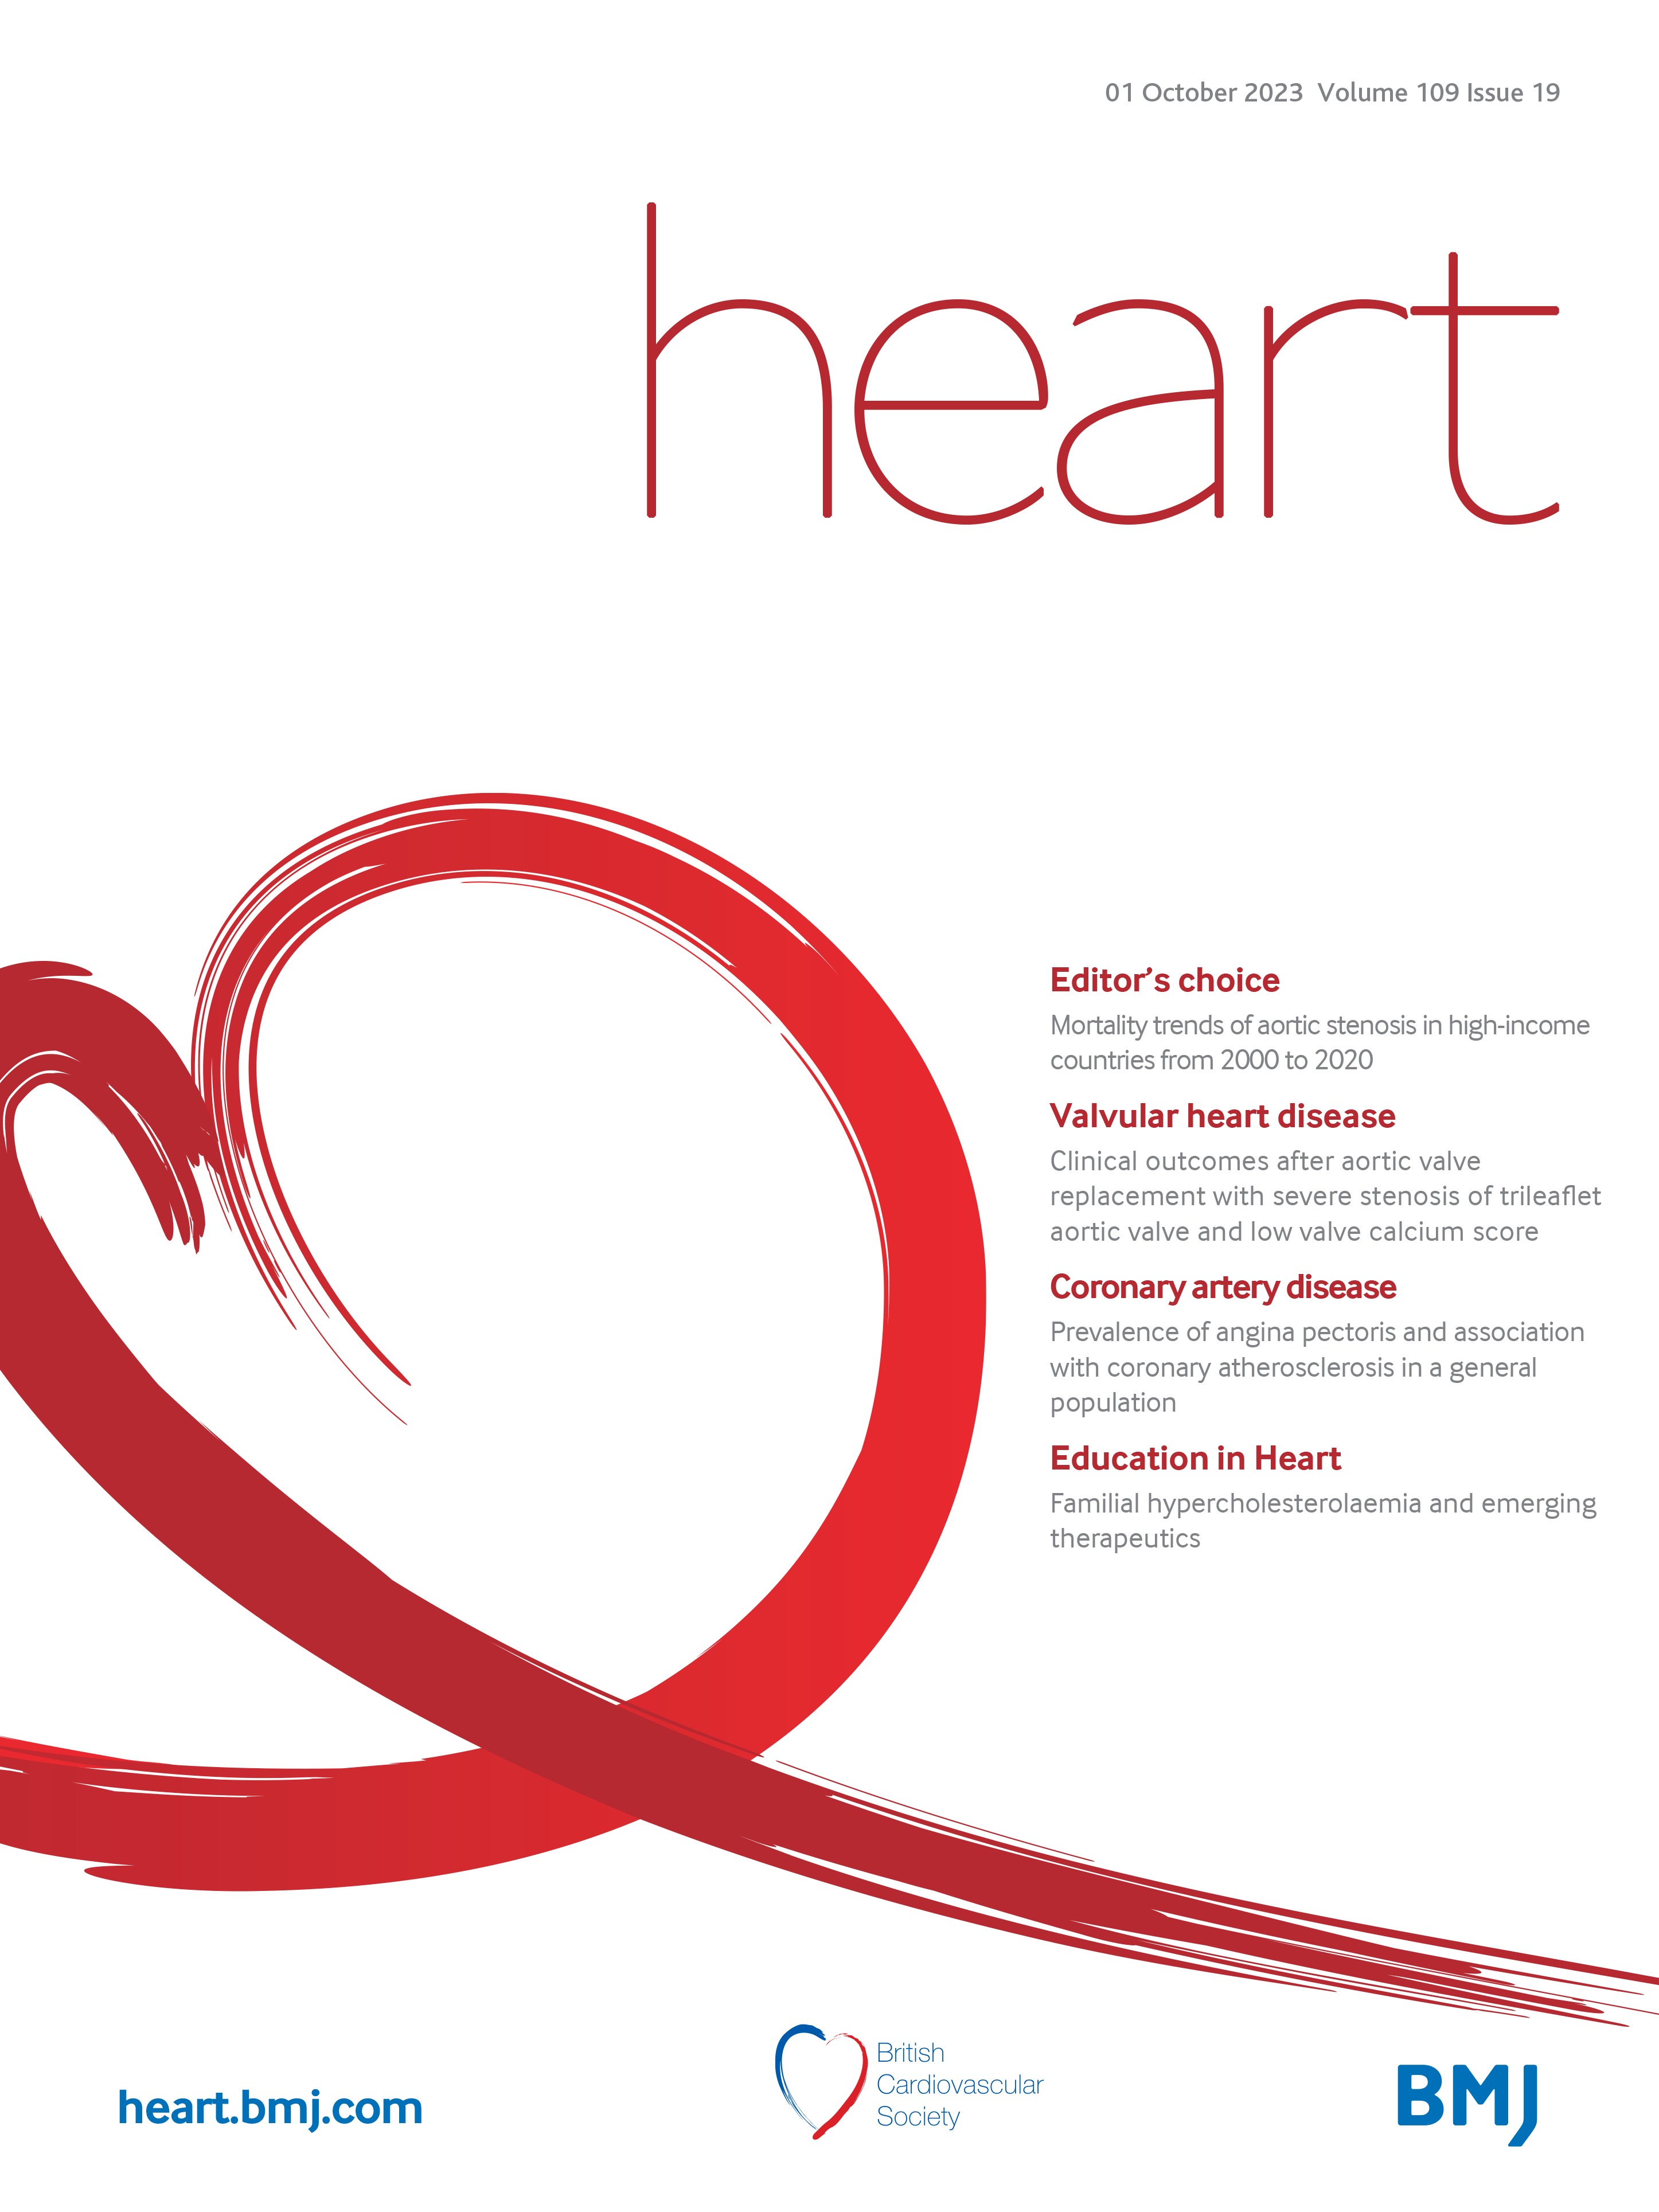 Typical angina and coronary artery disease: is the common ground smaller than we think?